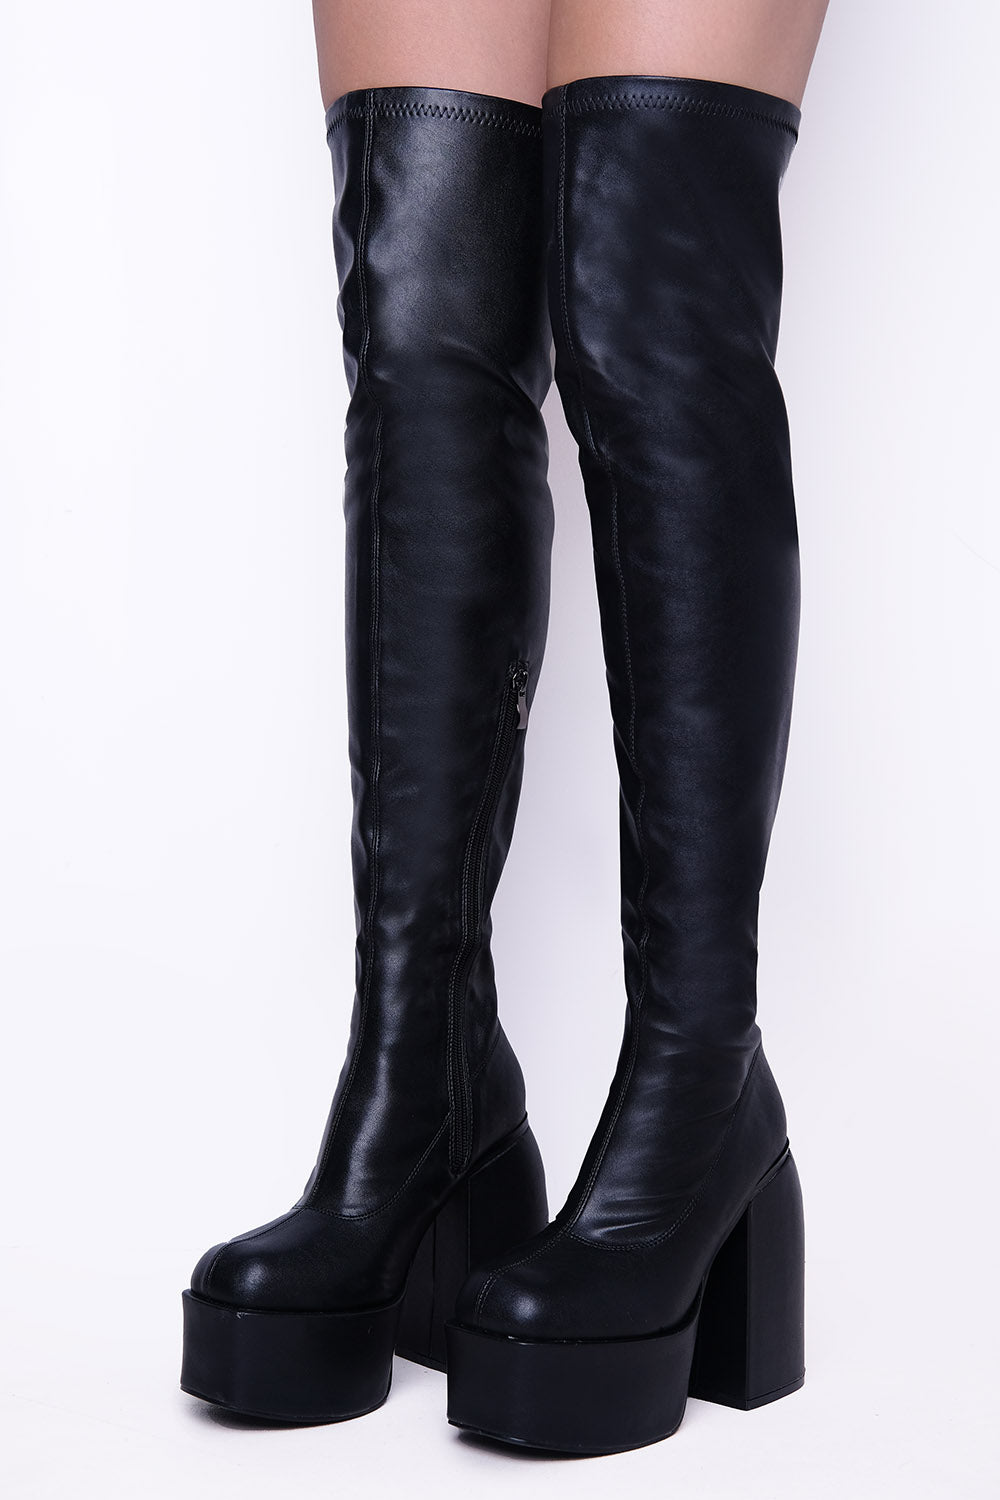 Black PU Block Heel Knee High Boots With Square Toe